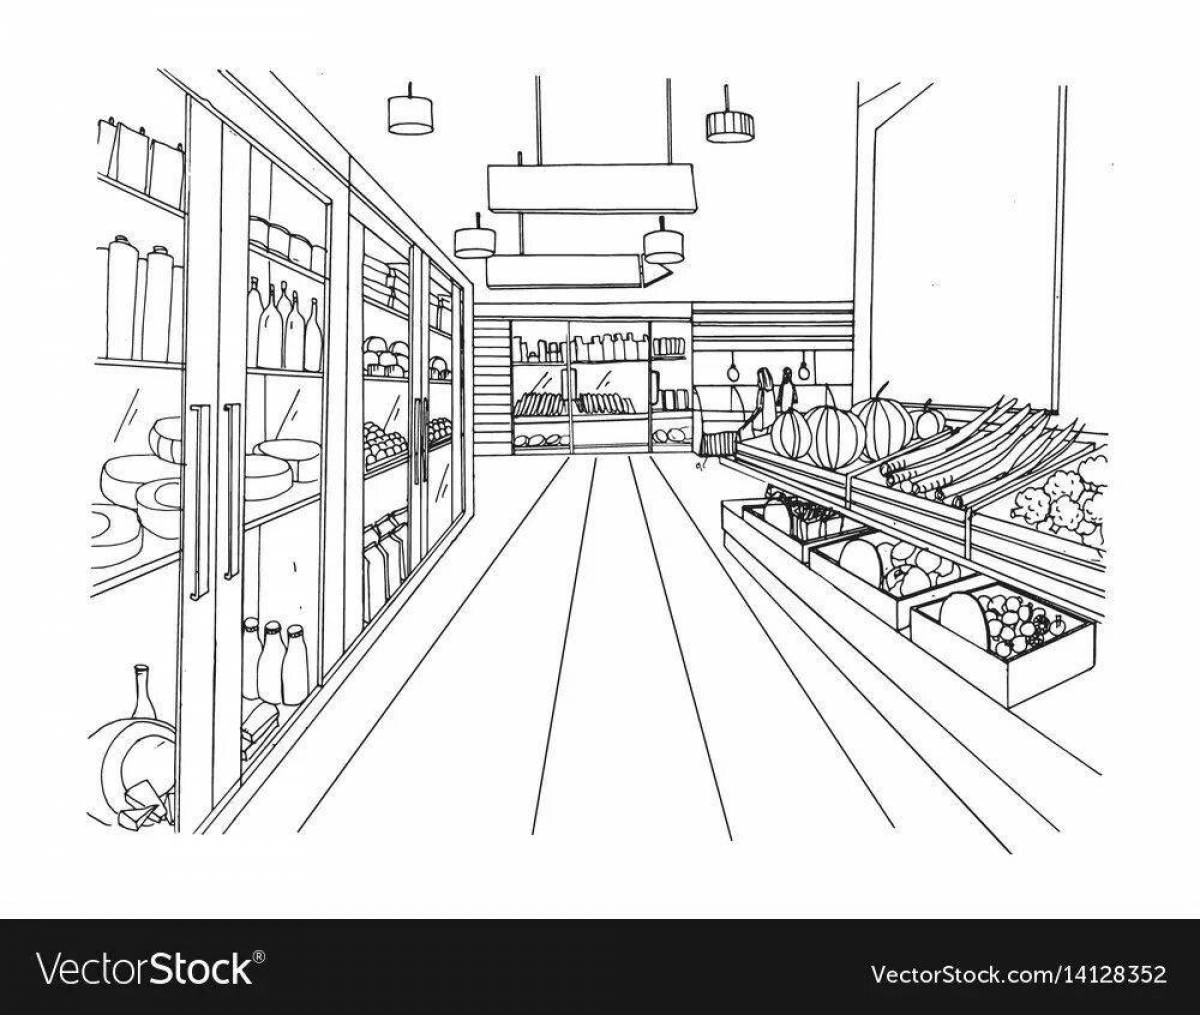 Coloring book amazing grocery store